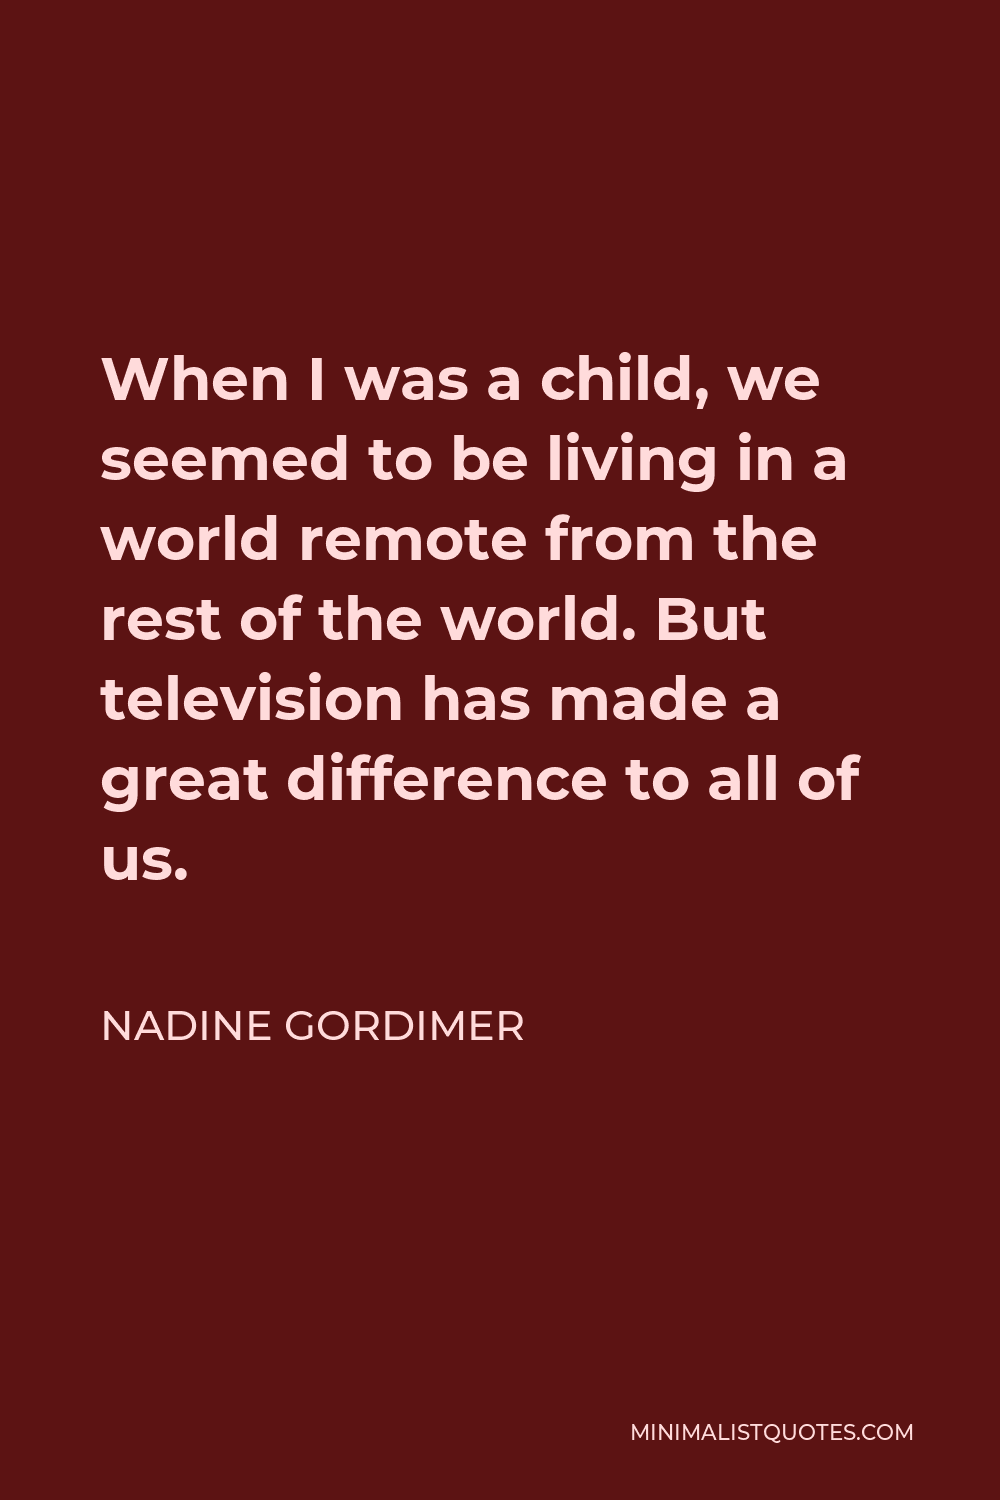 Nadine Gordimer Quote - When I was a child, we seemed to be living in a world remote from the rest of the world. But television has made a great difference to all of us.